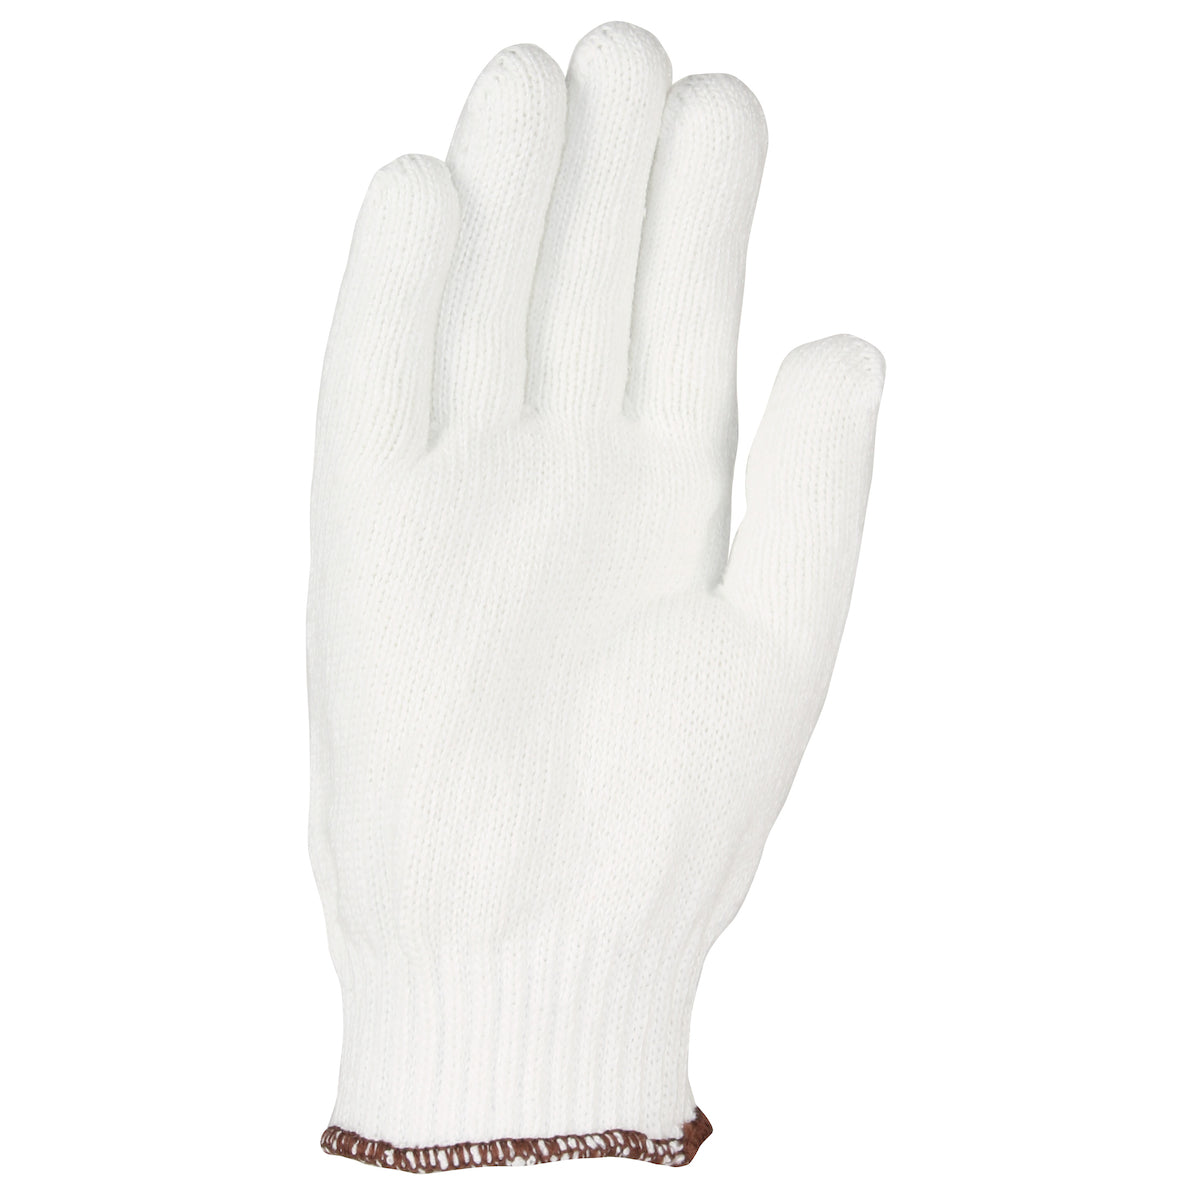 WPP MP35-L Seamless Knit Cotton and Polyester Glove - Heavy Weight